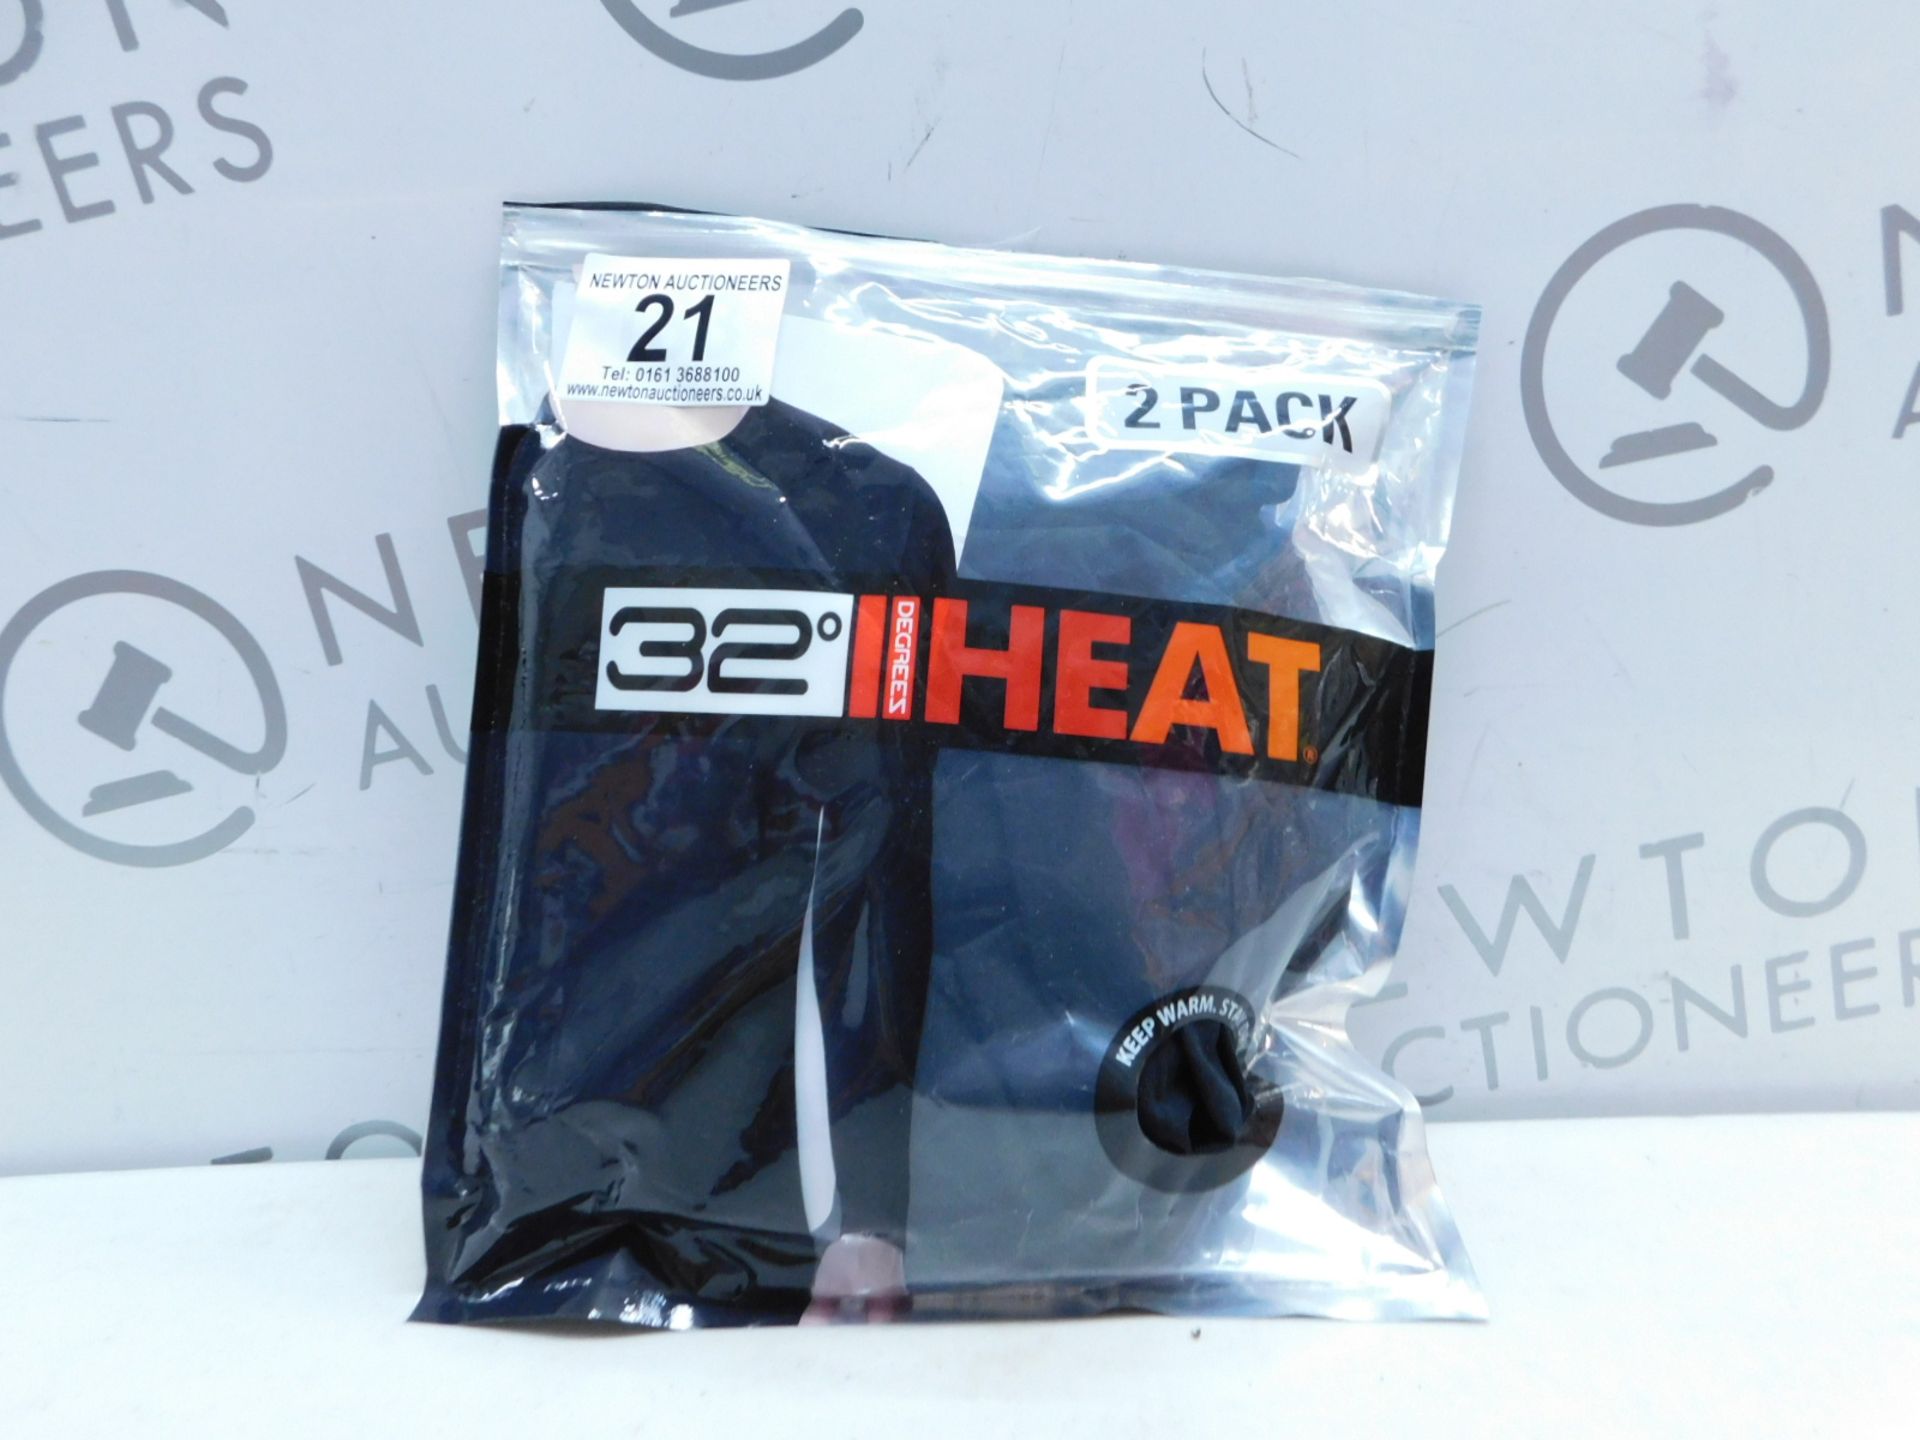 1 PACK OF 32HEAT MENS THERMAL LONG SLEEVE SIZE XL RRP Â£19.99